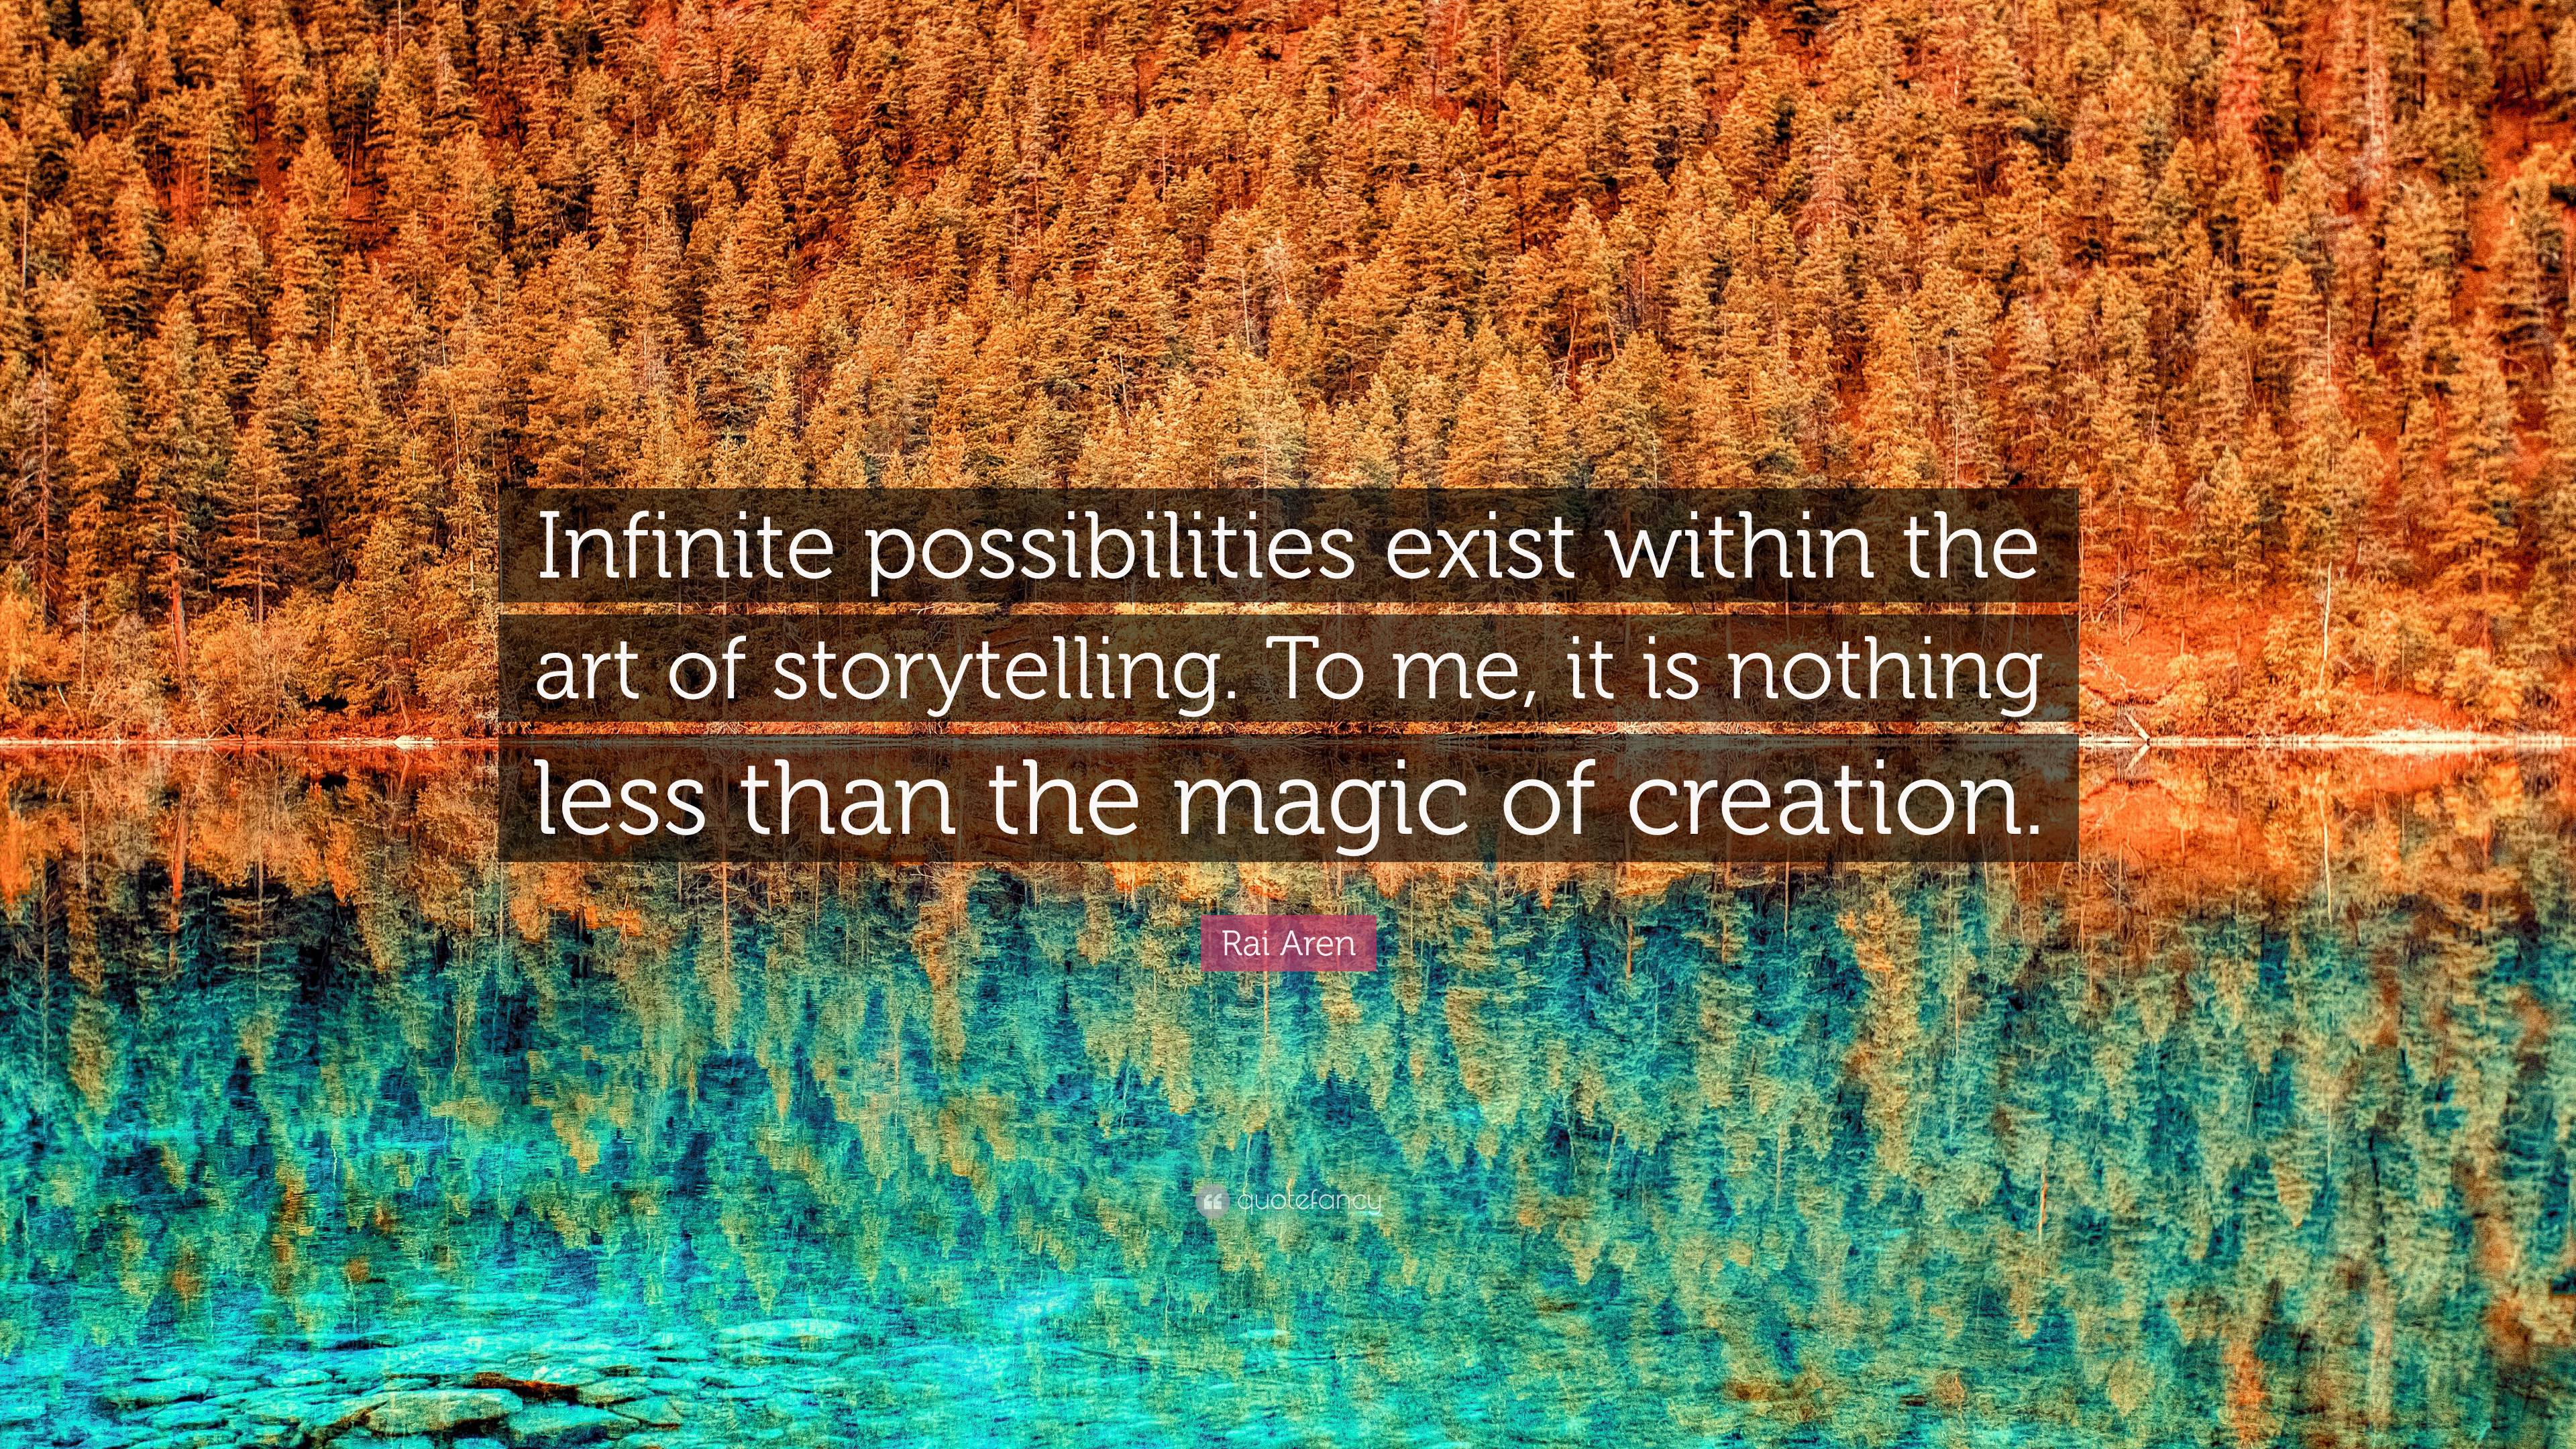 Rai Aren Quote: “Infinite possibilities exist within the art of  storytelling. To me, it is nothing